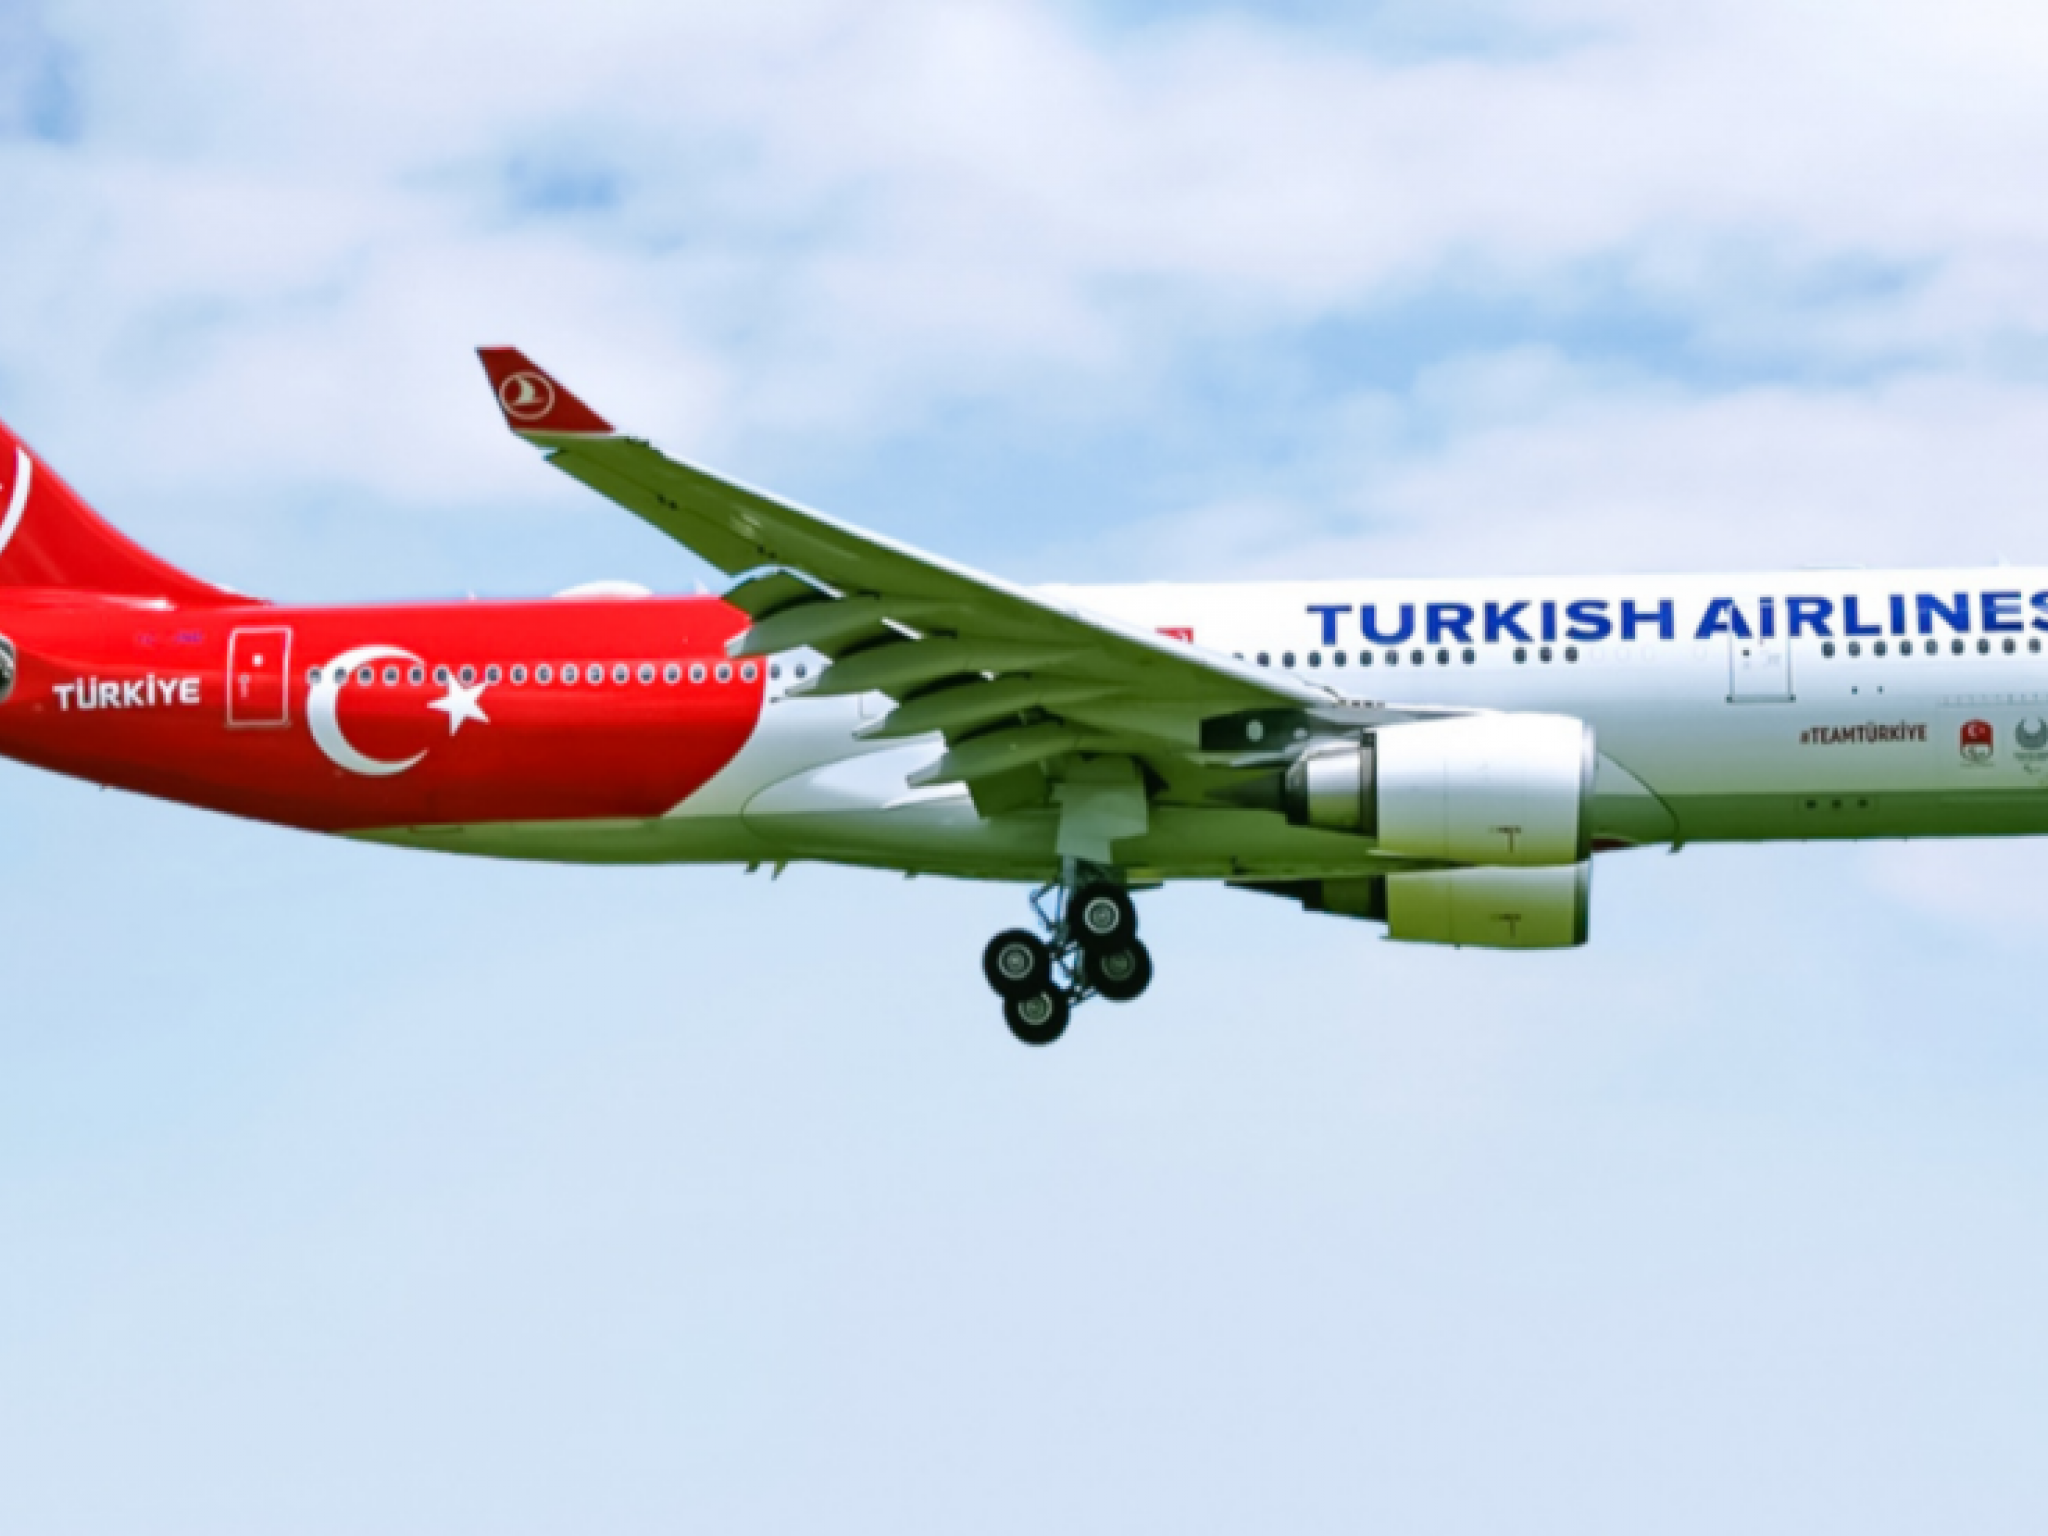  turkeys-aviation-ambitions-soar-with-20b-rolls-royce-airbus-agreement-report 